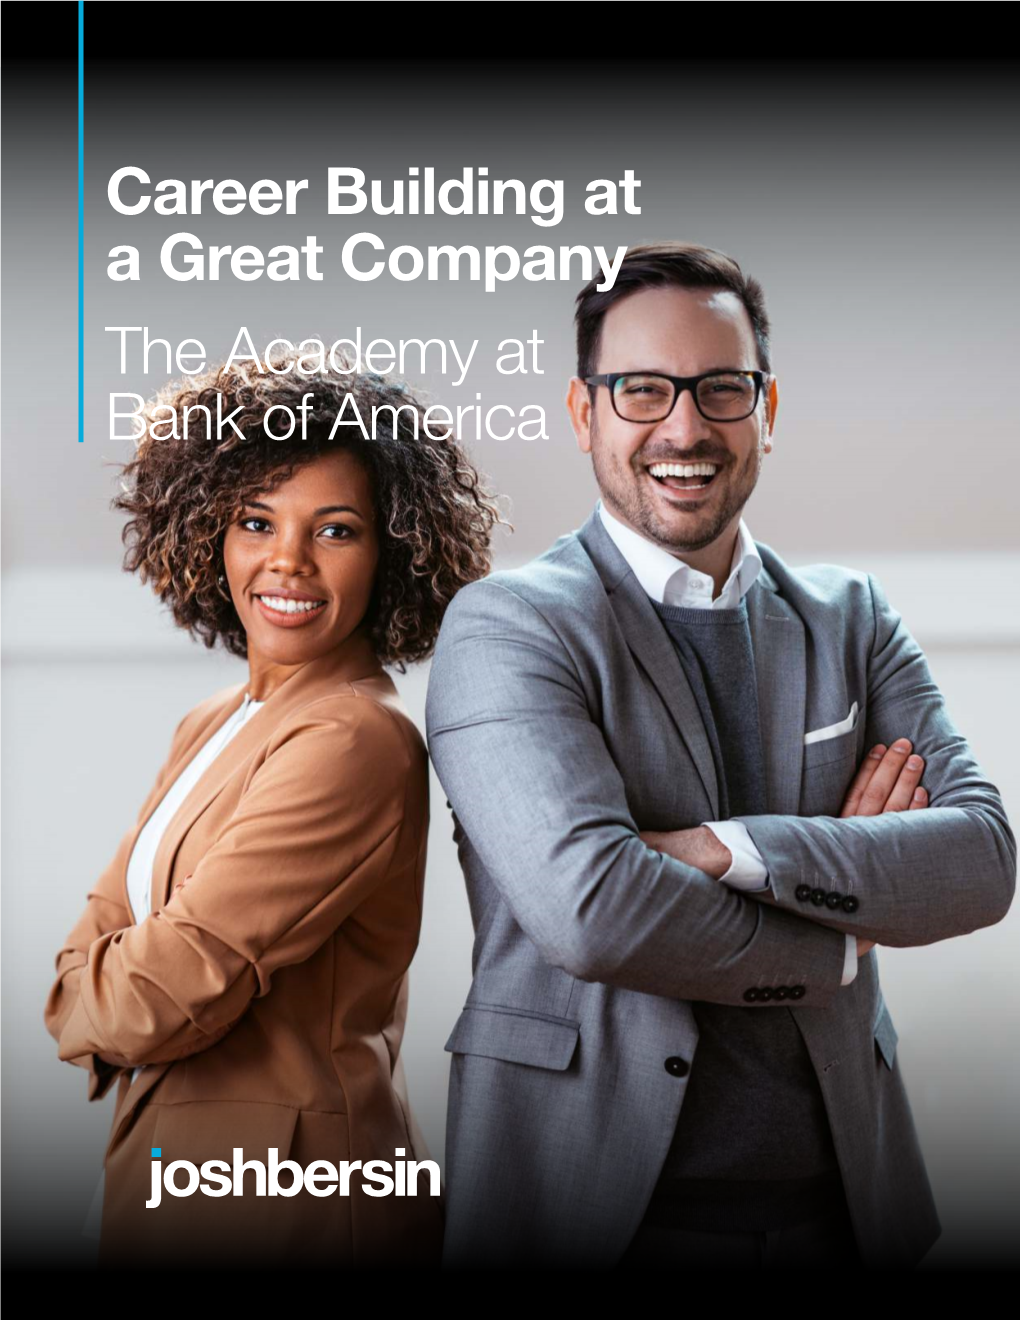 Career Building at a Great Company the Academy at Bank of America